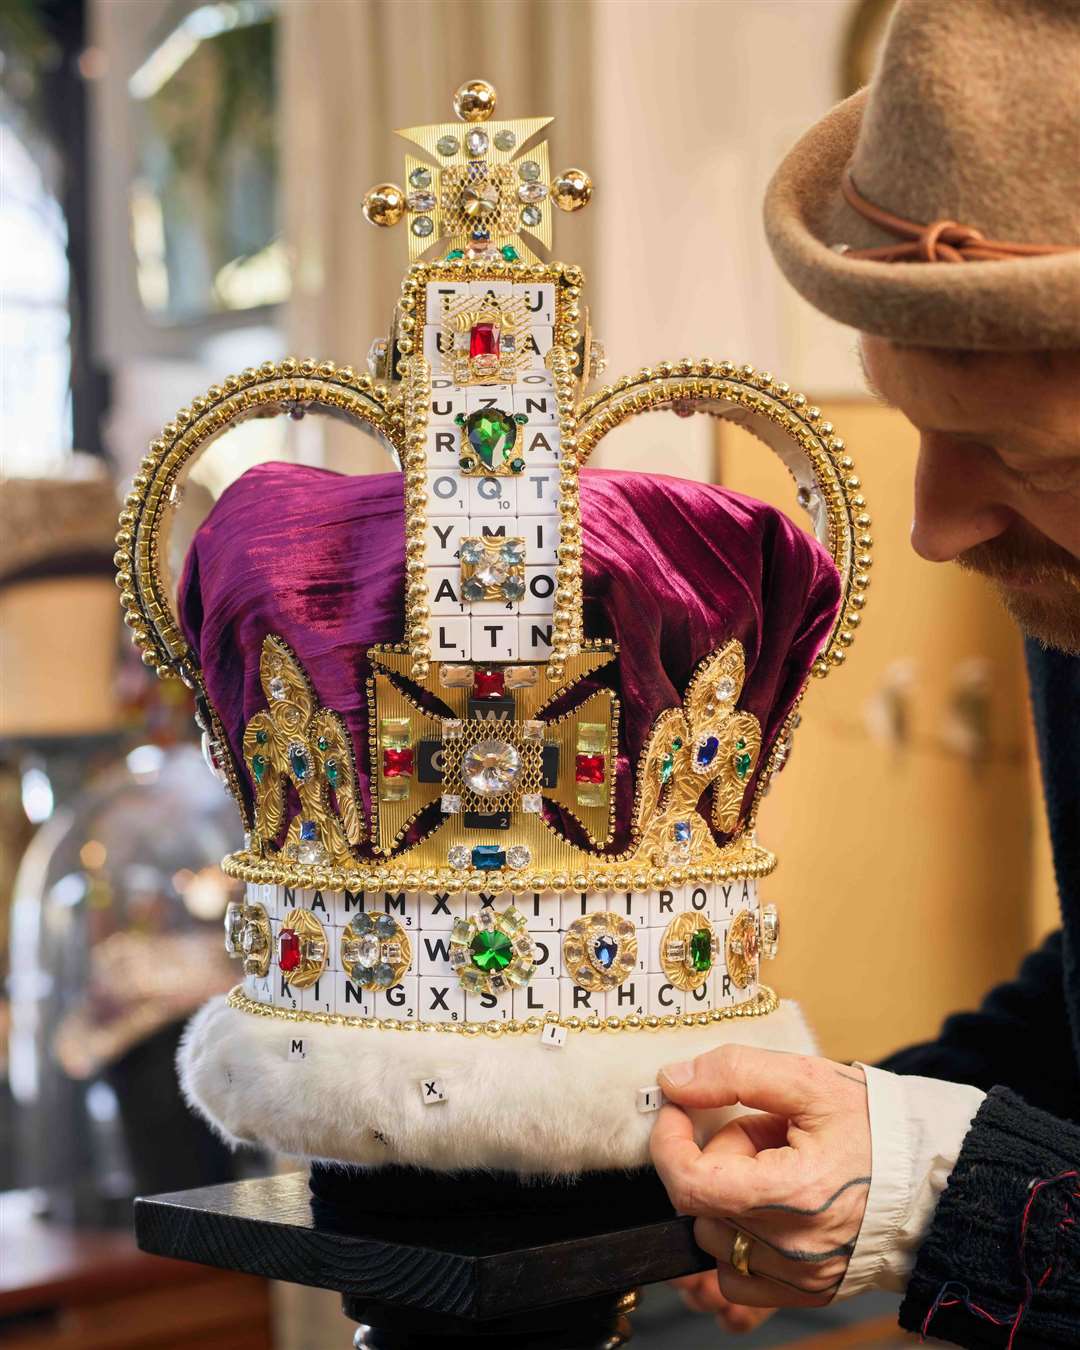 British milliner Justin Smith of J Smith Esquire poses with the crown he has made (Mattel/Michael Bowles)